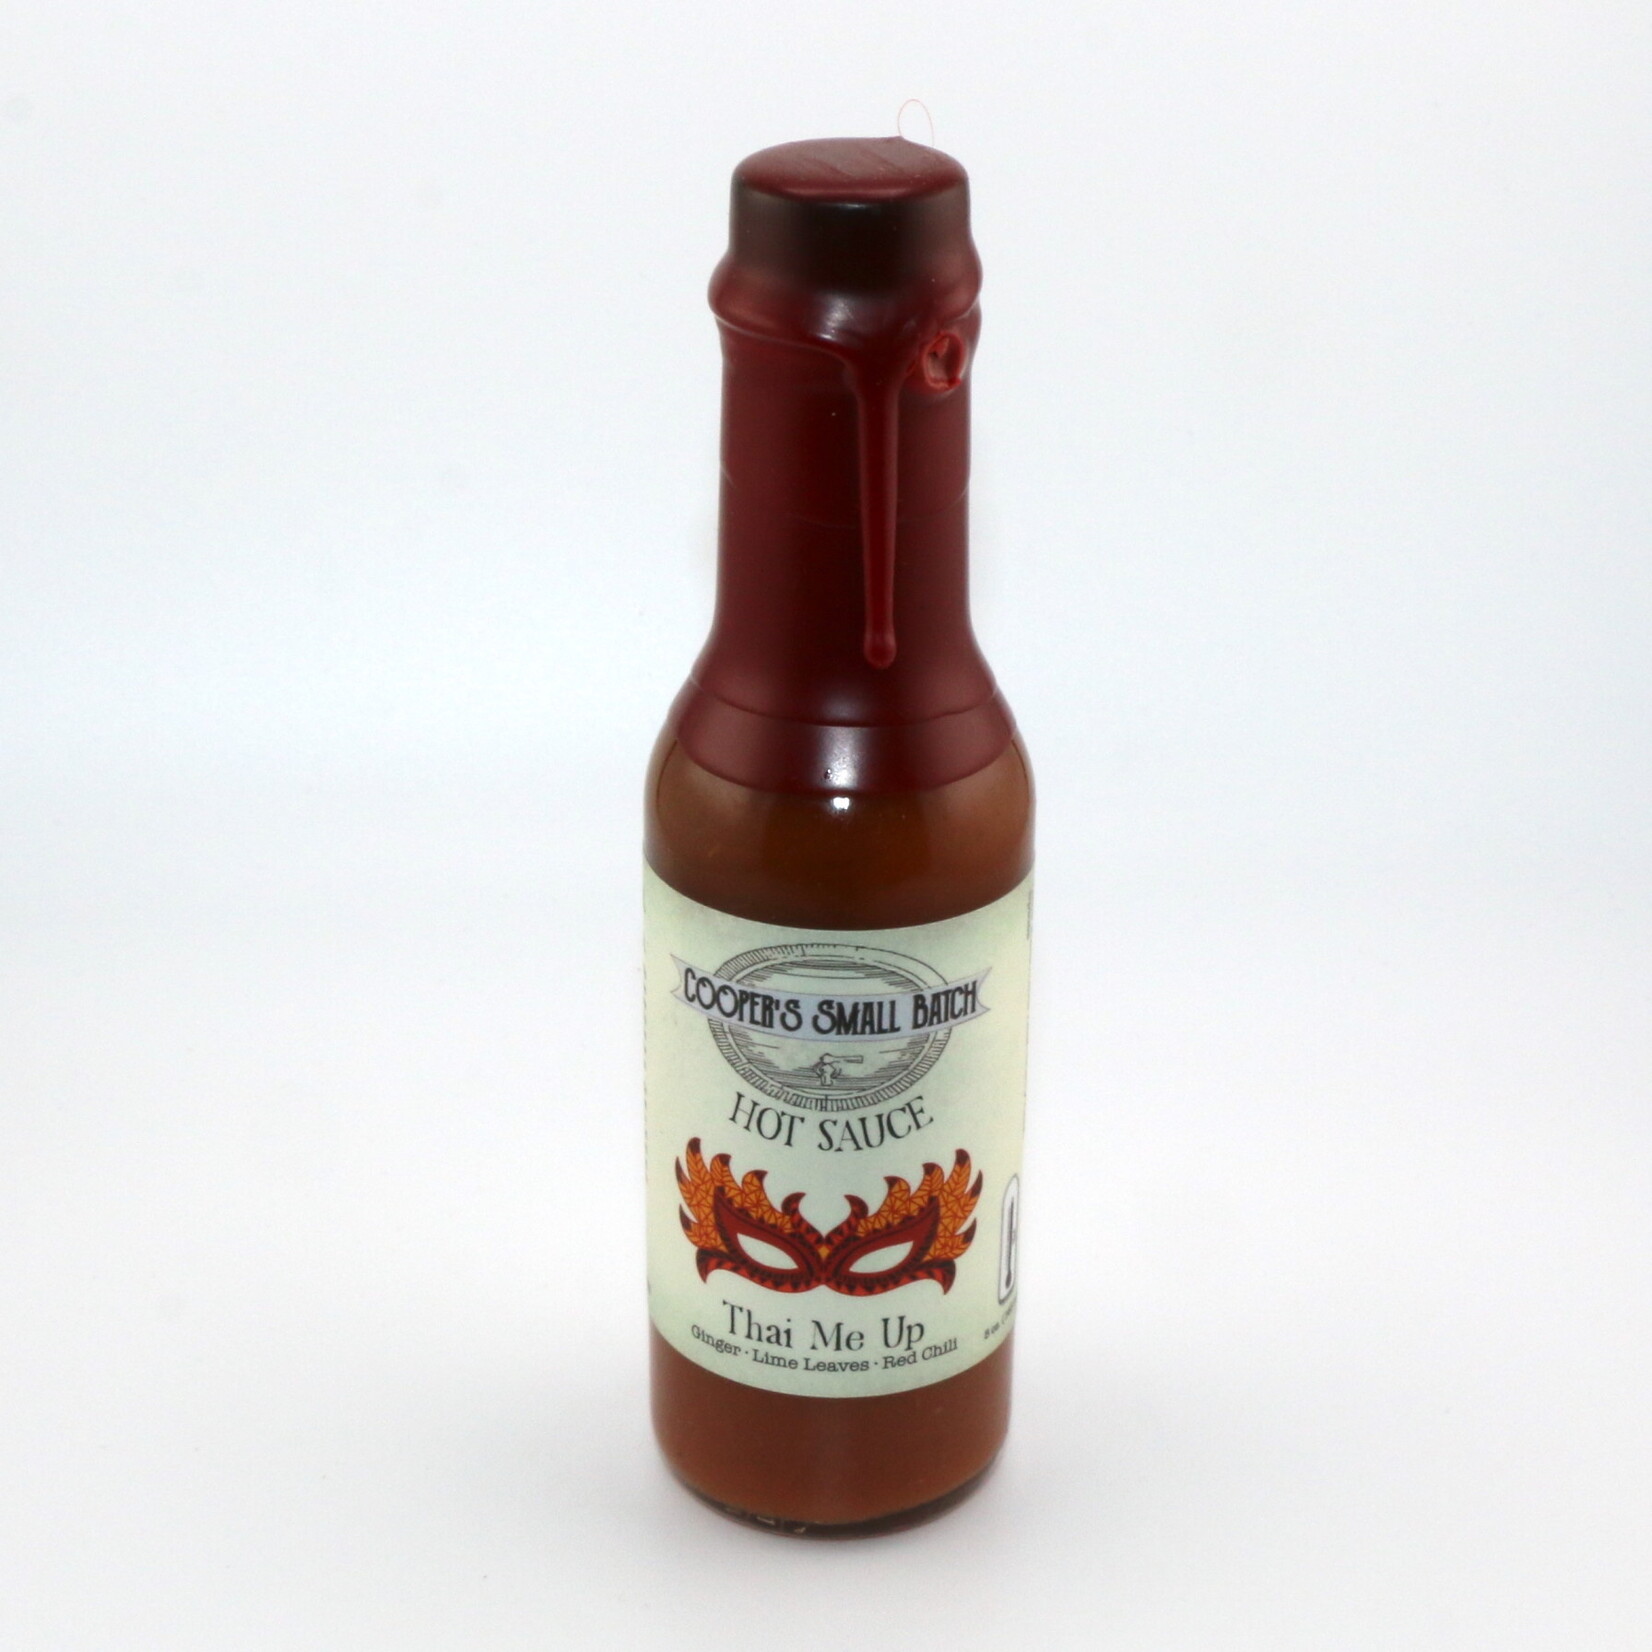 Coopers Small Batch Cooper's Small Batch Thai Me Up  Hot Sauce